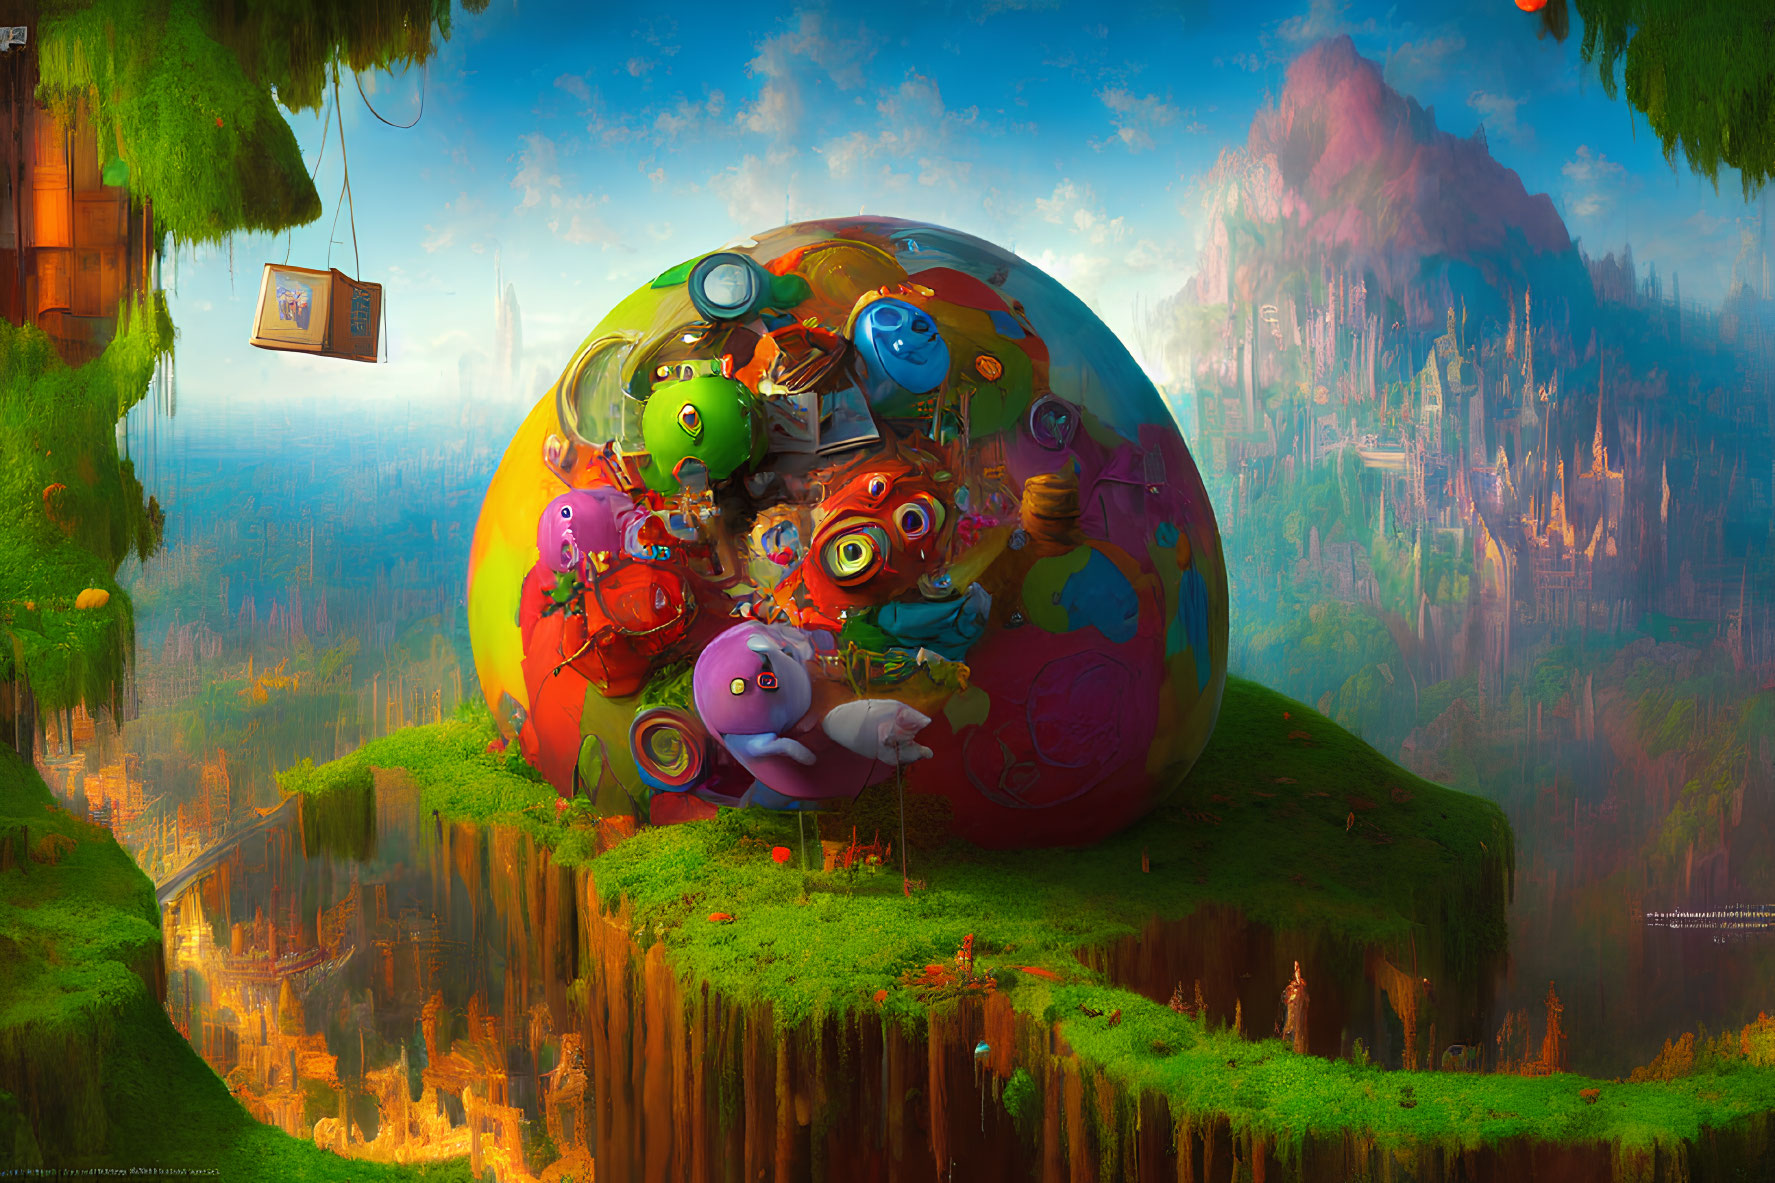 Colorful animated characters in whimsical landscape with spherical structure